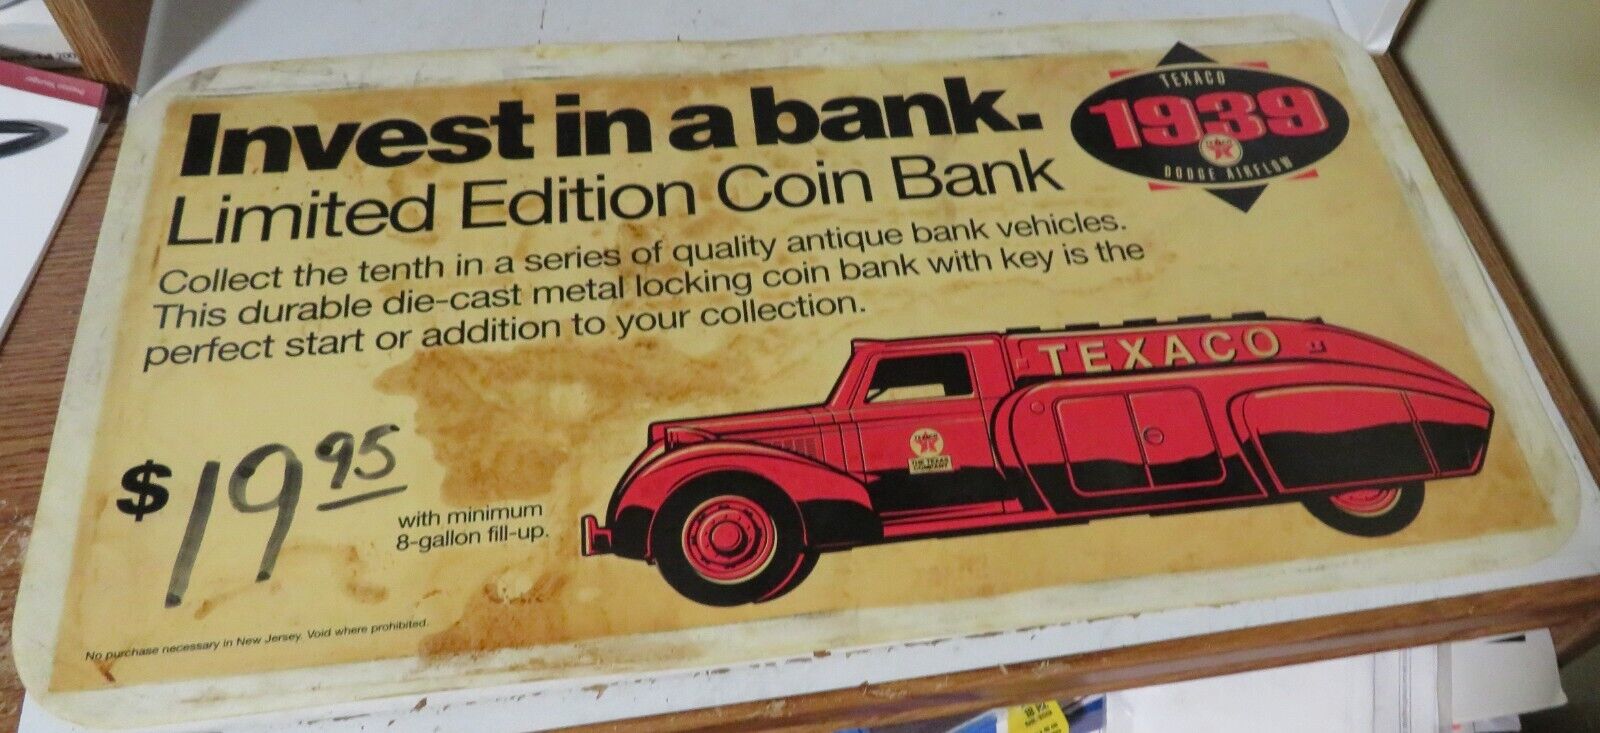 Large Vintage Texaco Ad Invest In A Bank Dodge Airflow Texaco Advertising Used B